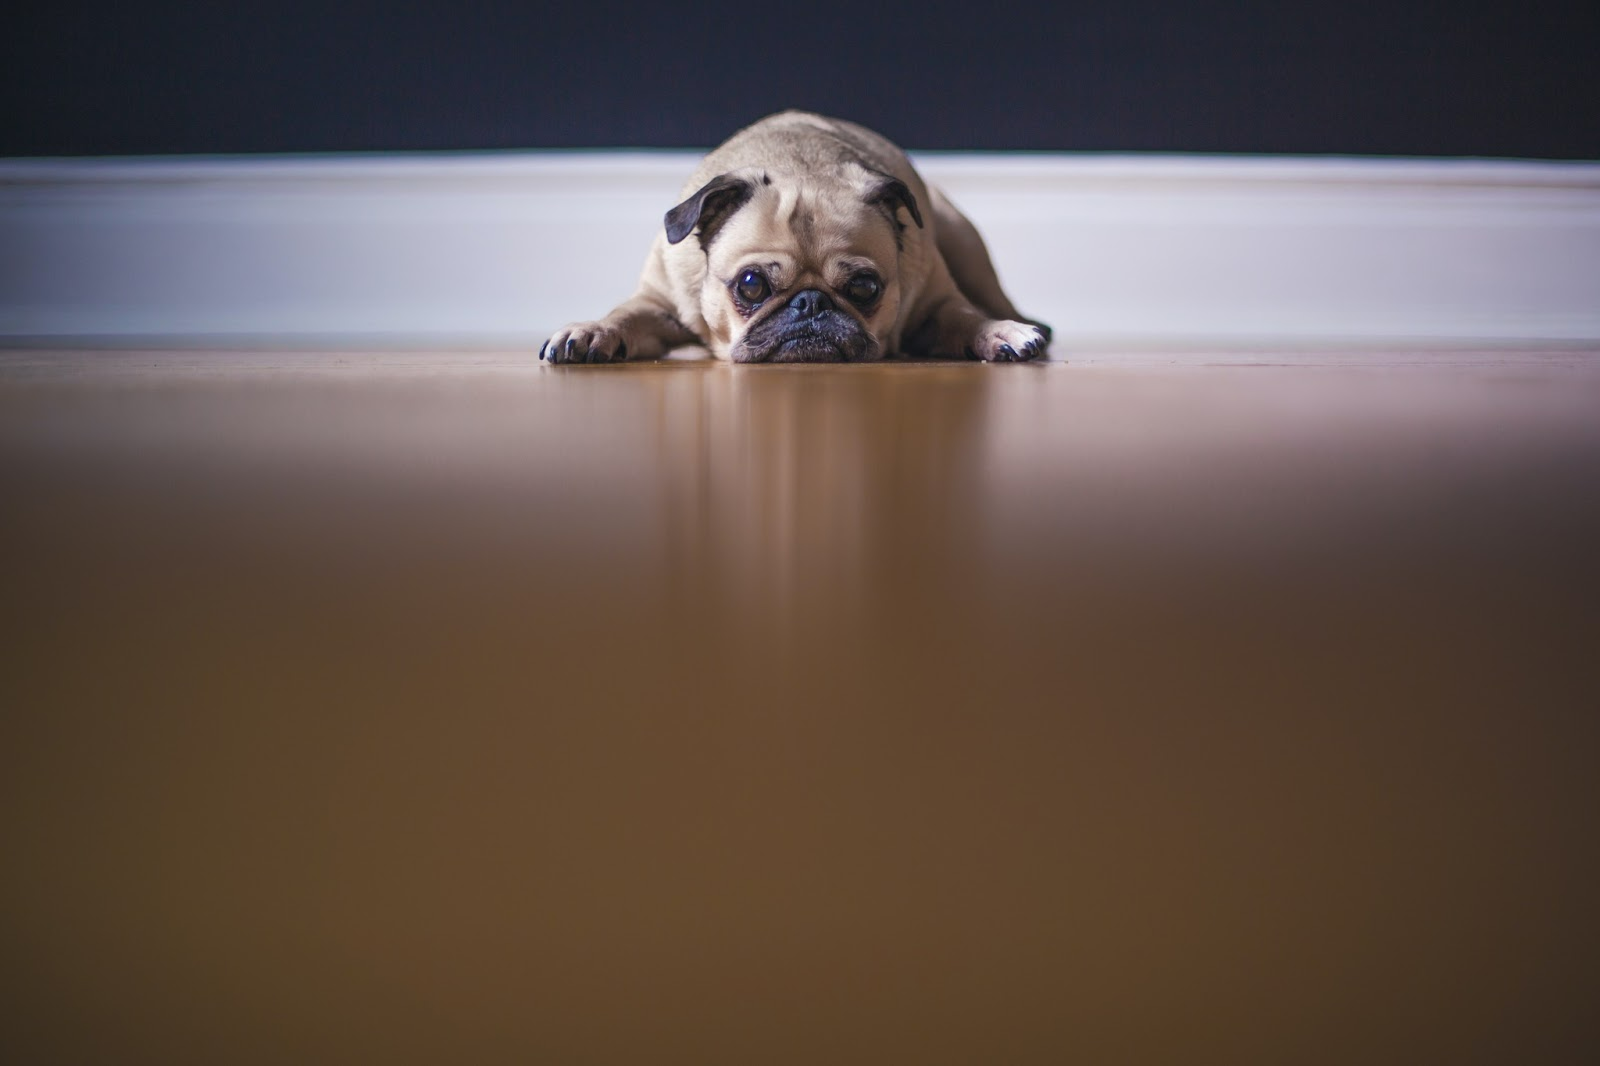  Mental Health Awareness Month: How To Take Care Of Your Dog's Mental Health